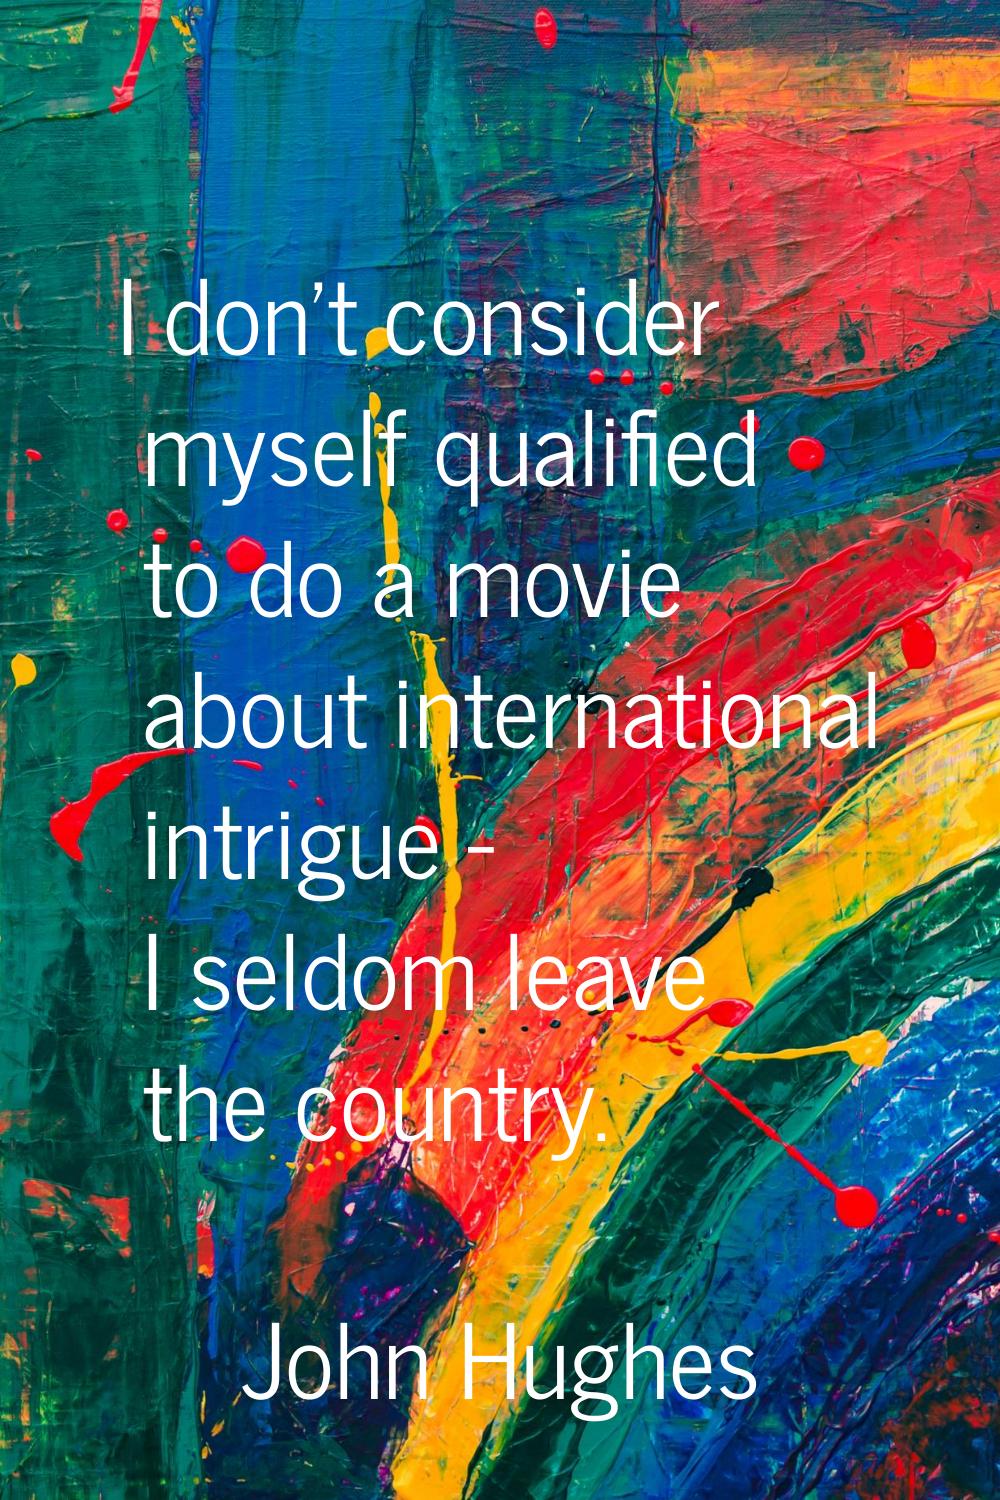 I don't consider myself qualified to do a movie about international intrigue - I seldom leave the c